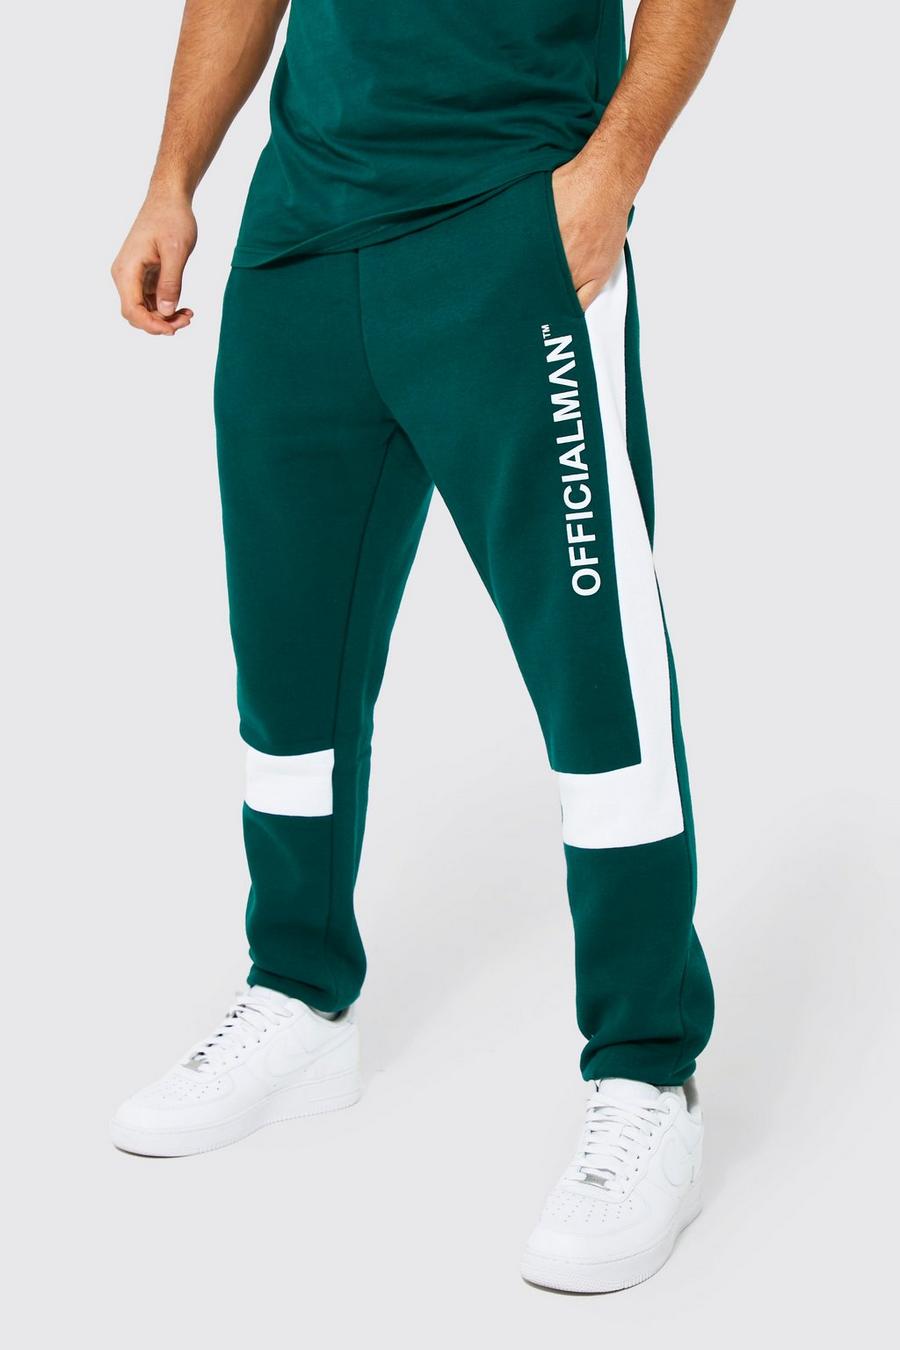 Forest green Slim Official Man Colour Block Joggers